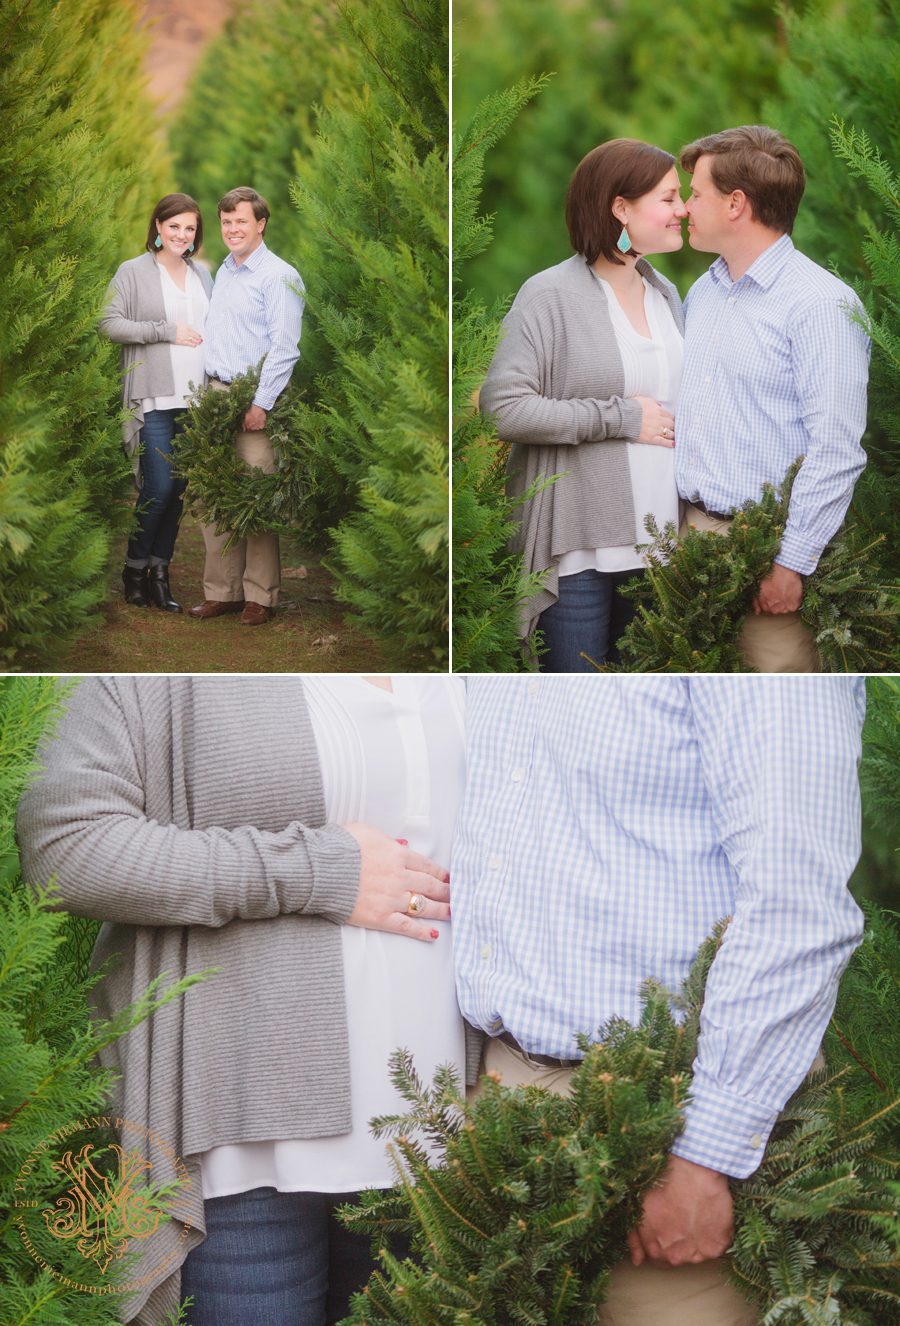 Christmas maternity portraits at a tree farm in Oconee County, GA of a couple expecting their first baby.